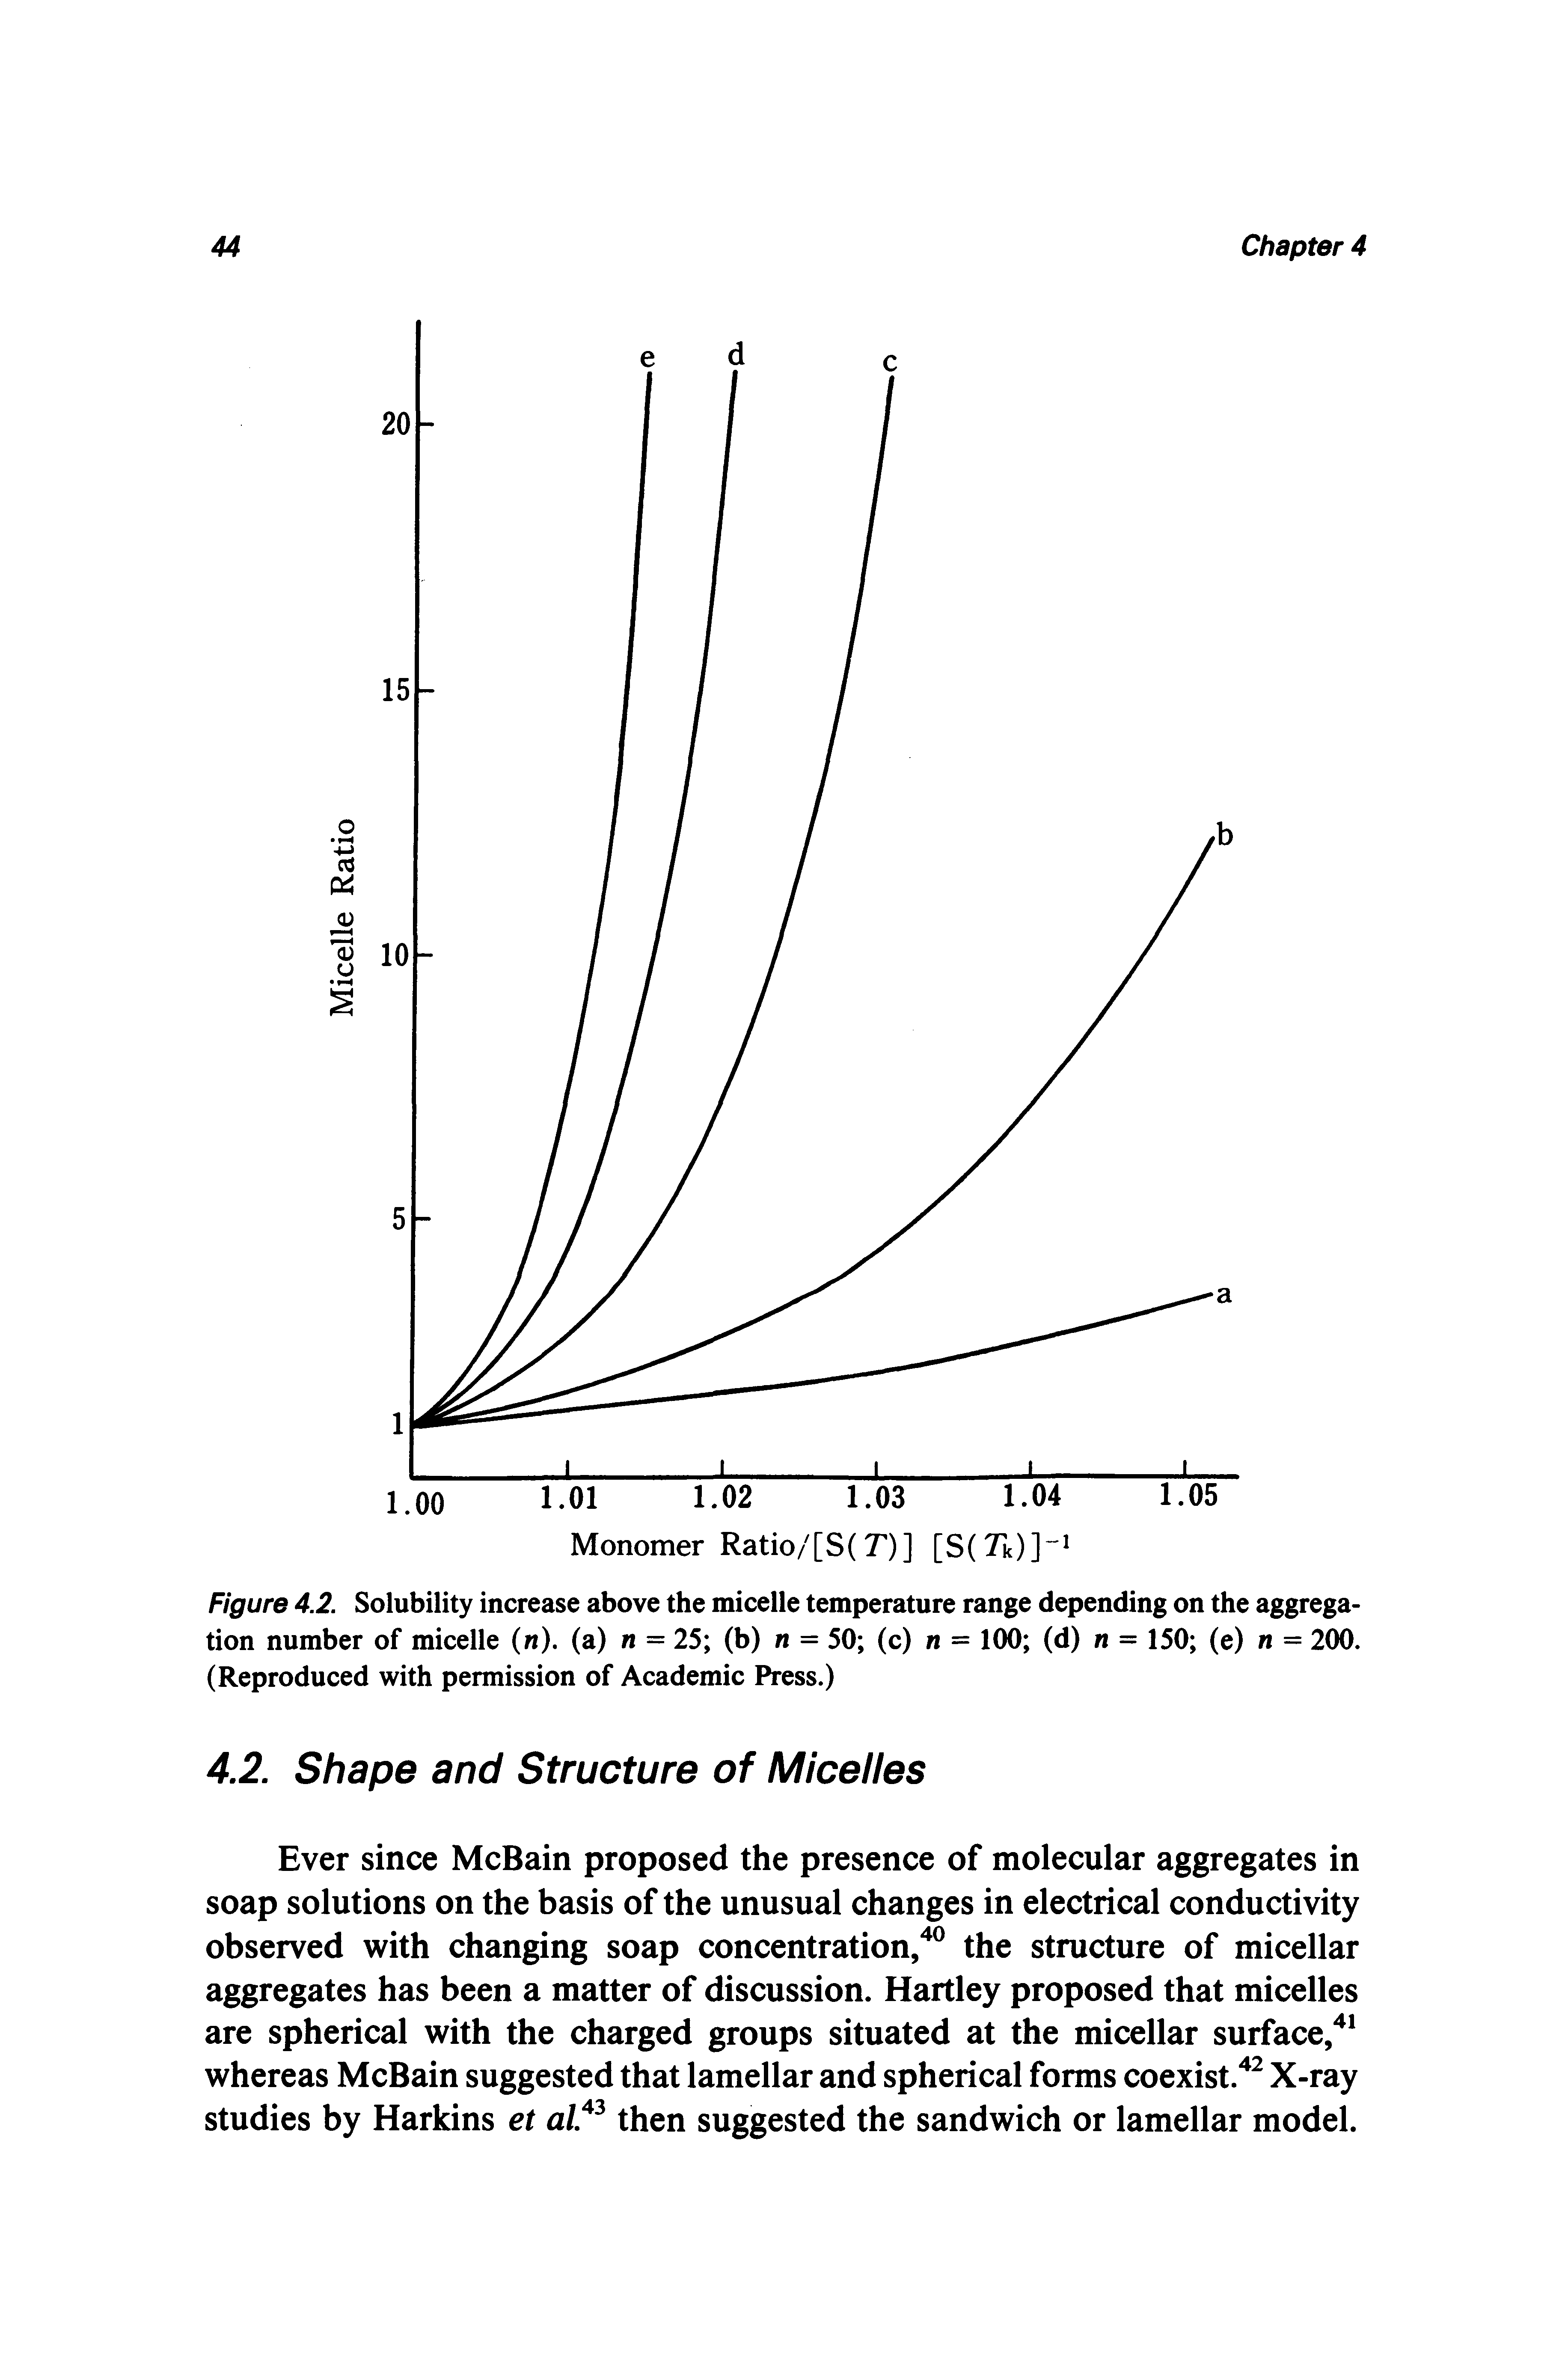 Figure 4.2. Solubility increase above the micelle temperature range depending on the aggregation number of micelle (n). (a) n = 25 (b) n = 50 (c) n = 100 (d) n = 150 (e) n = 200. (Reproduced with permission of Academic Press.)...